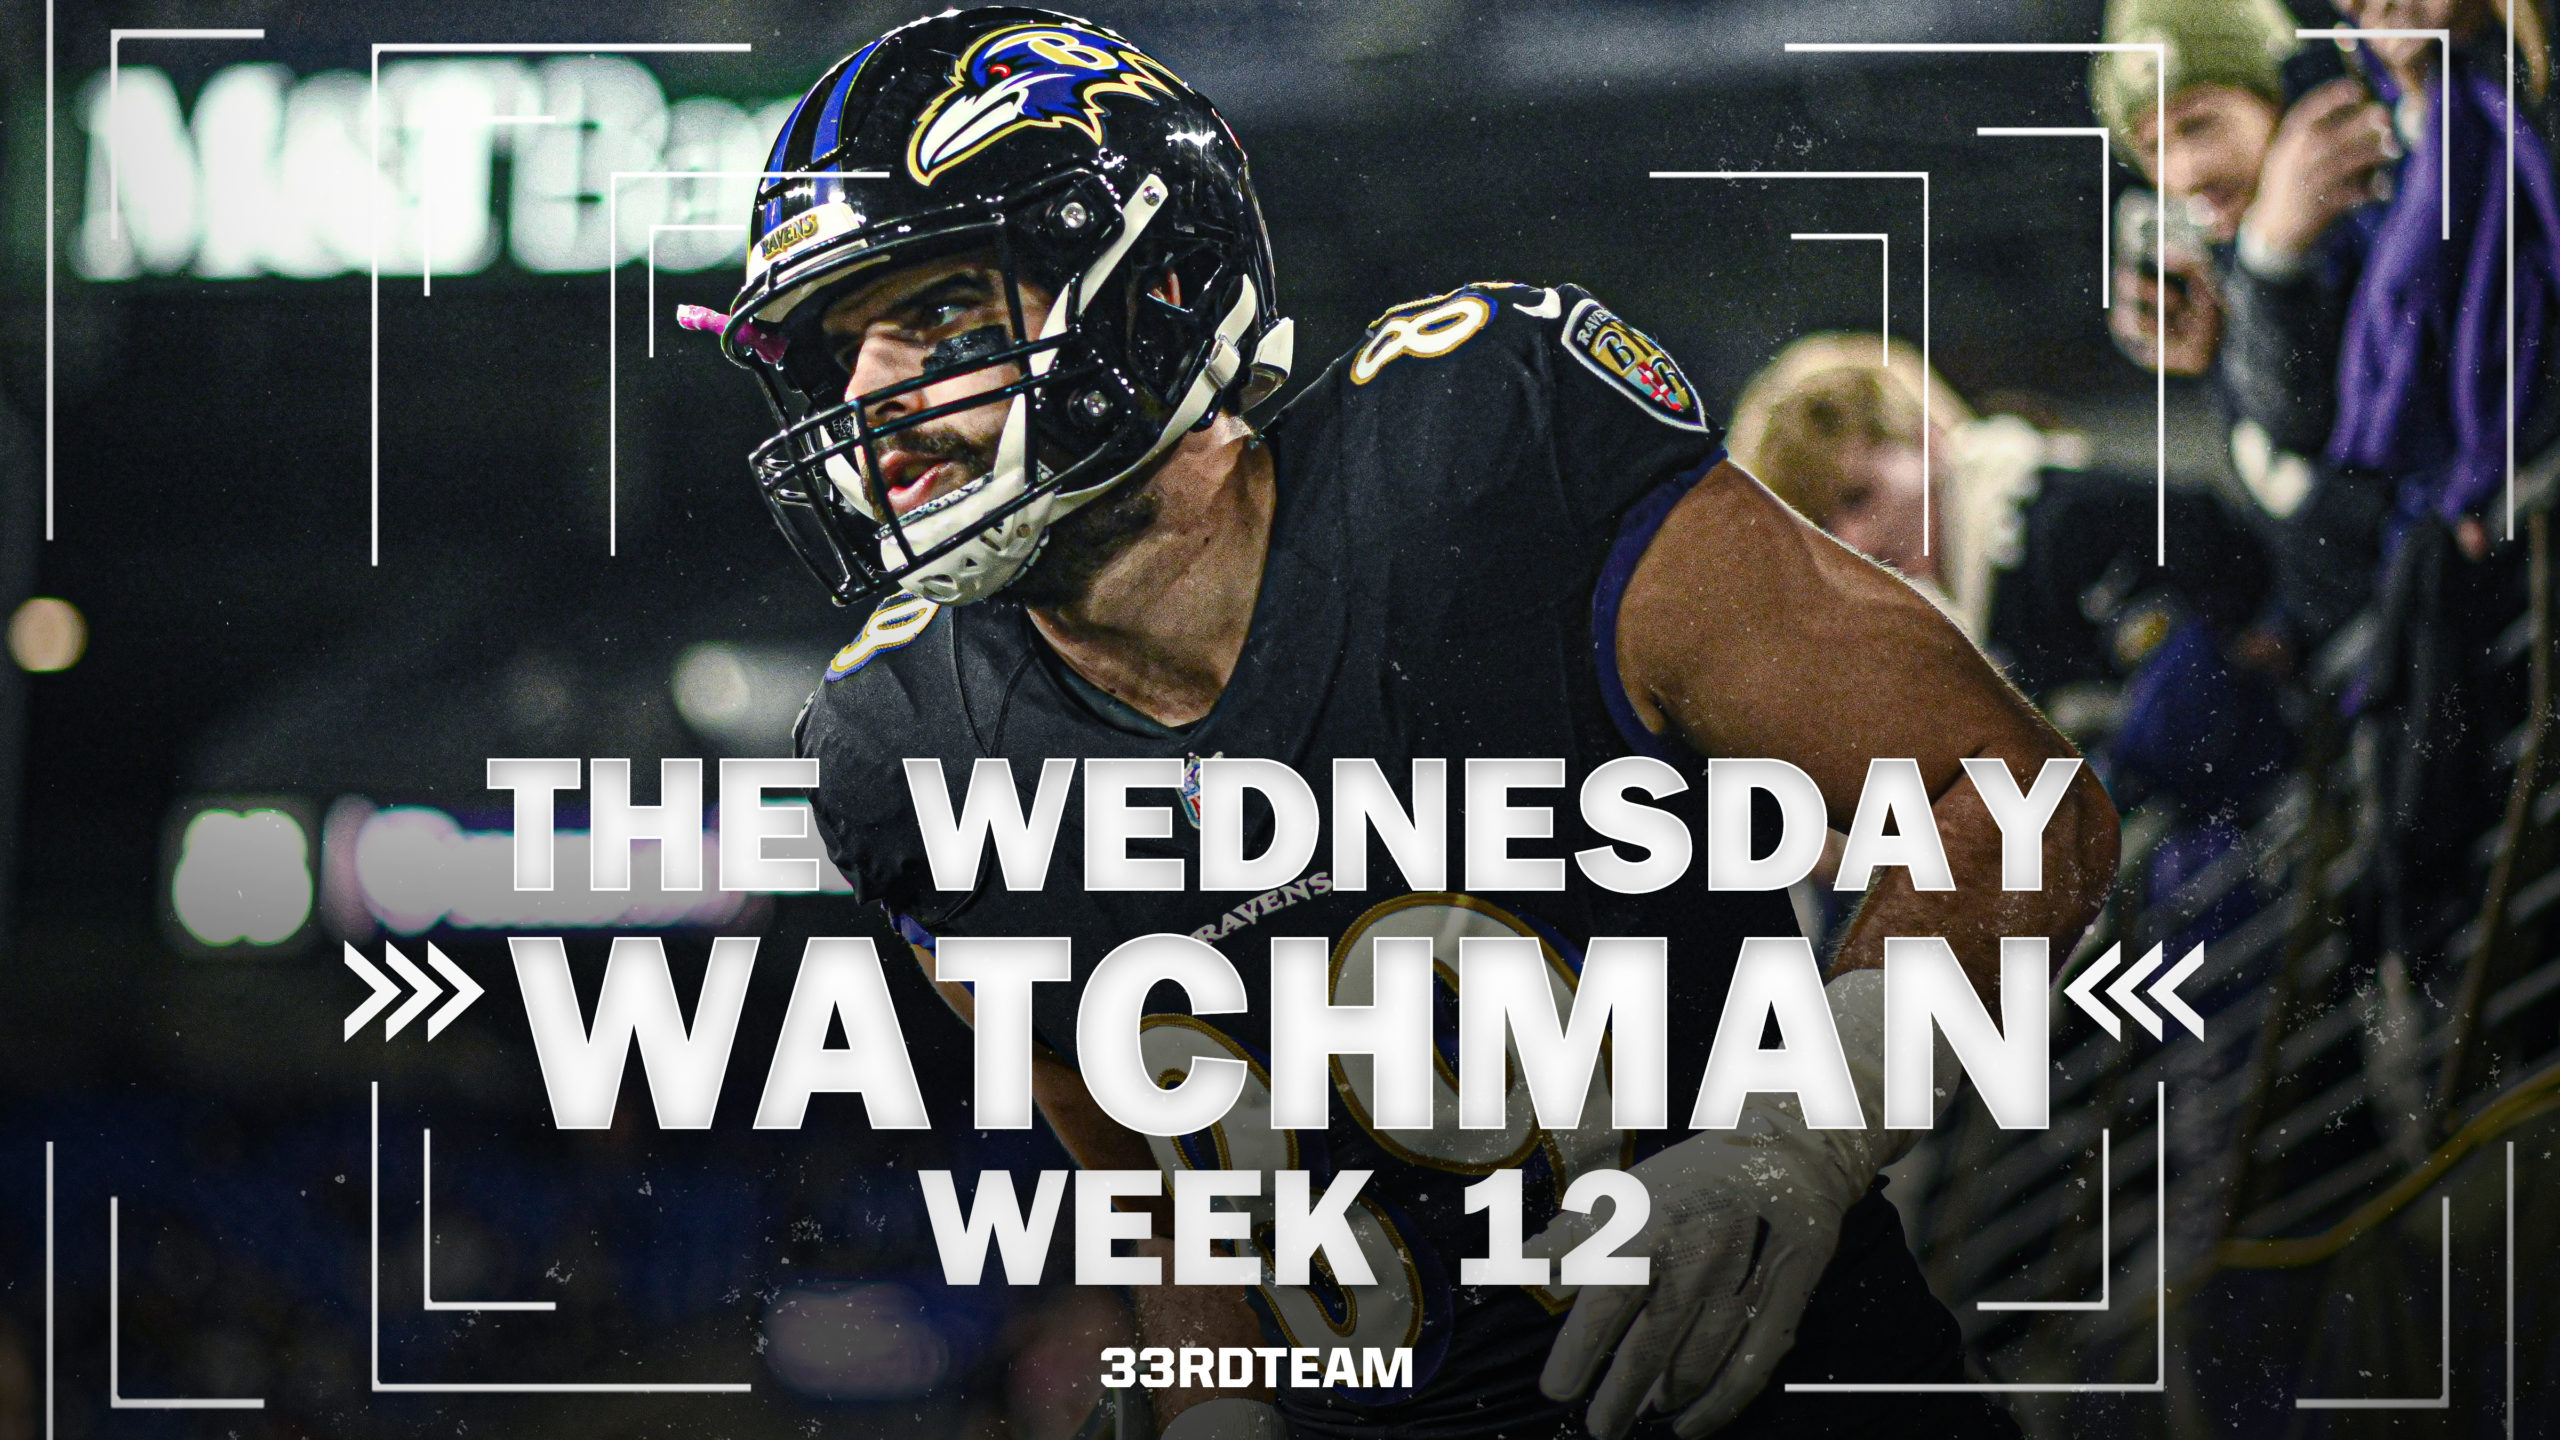 The Wednesday Watchman: NFL Week 12 Betting, DFS and Fantasy Information to Know